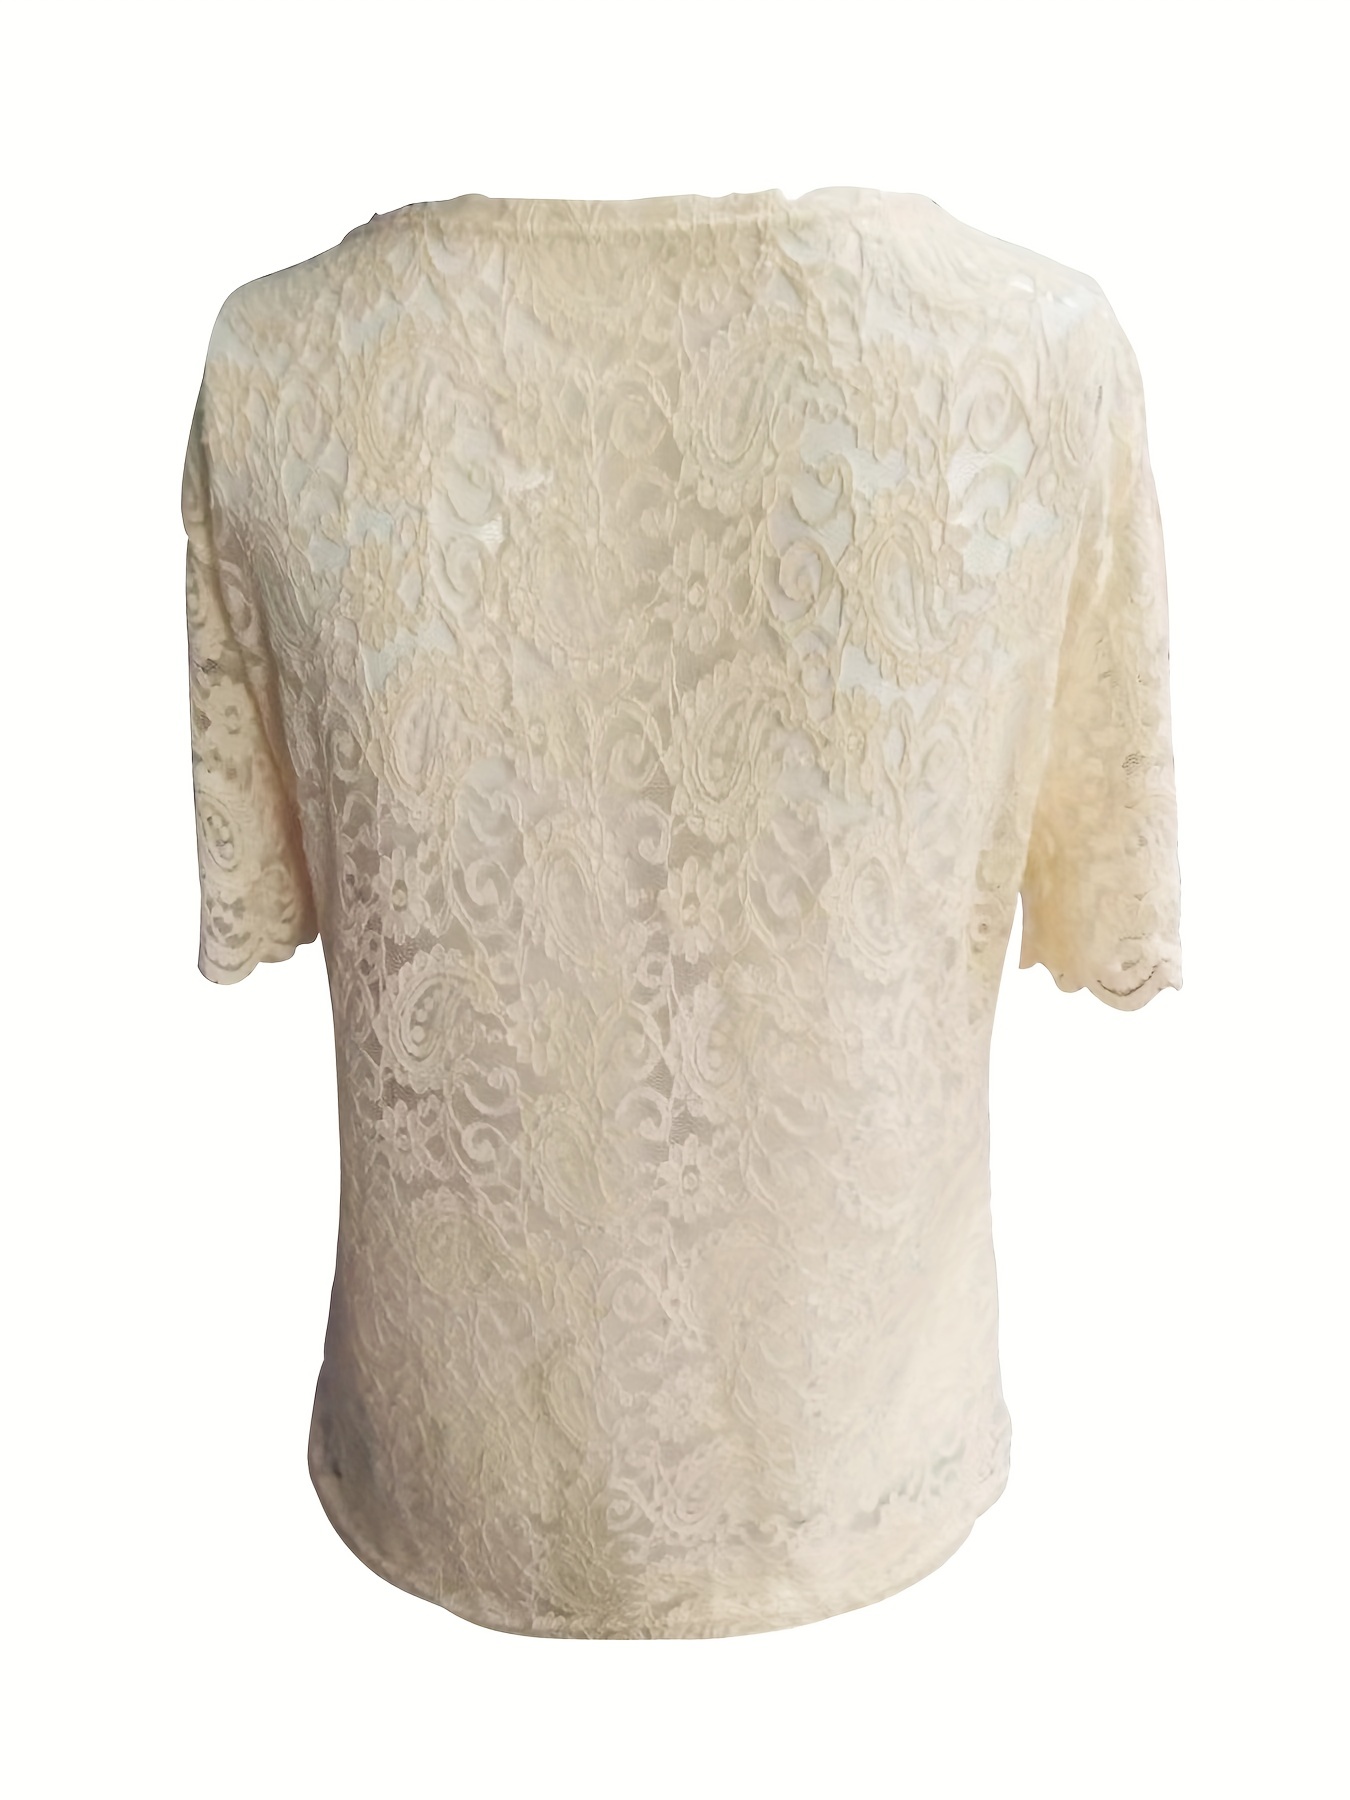 Ivory Sheer Lace Top - Floral Lace Top - Lace Short Sleeve Top - Lulus